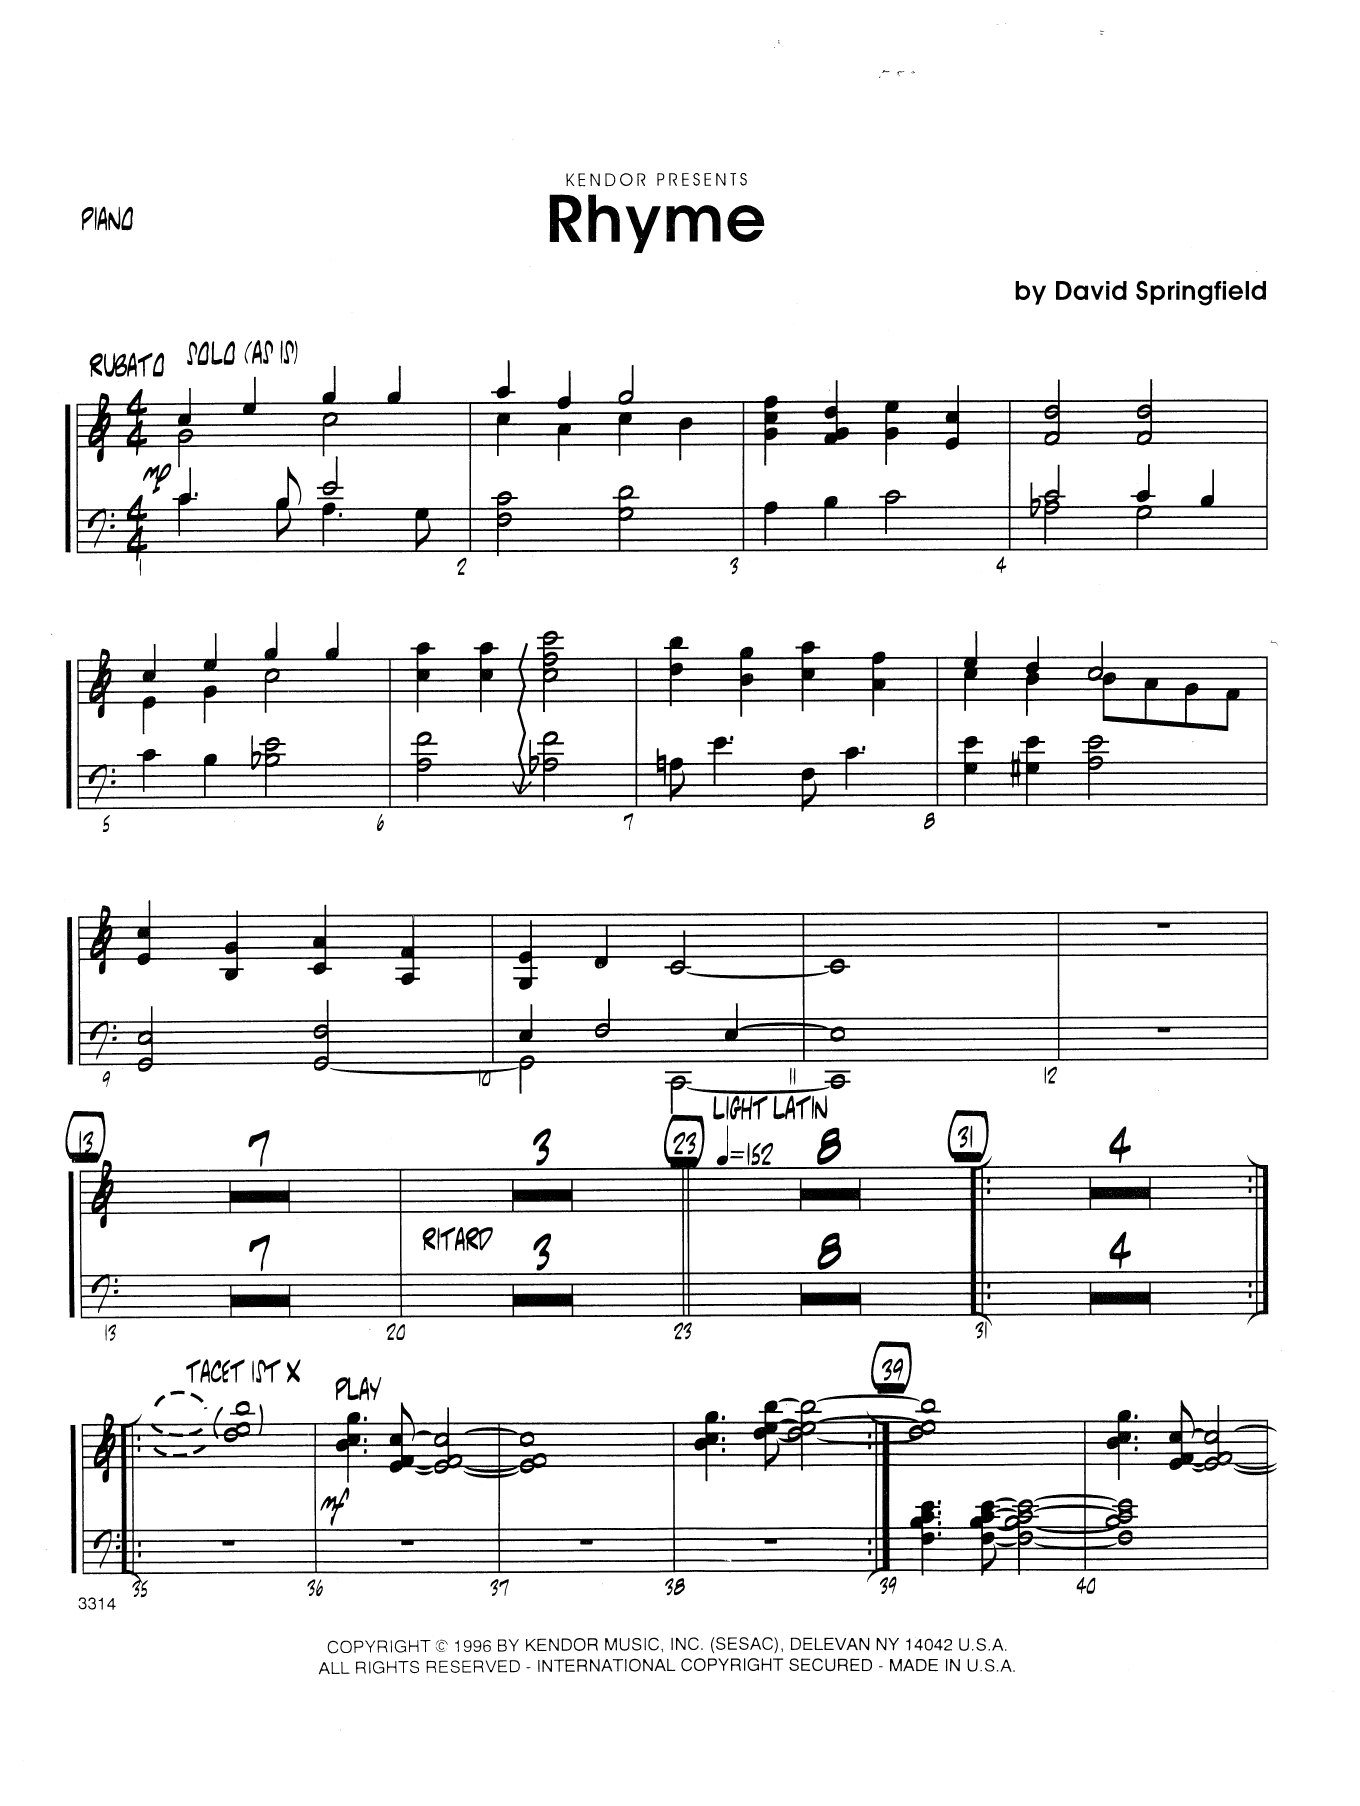 Download Dave Springfield Rhyme - Piano Sheet Music